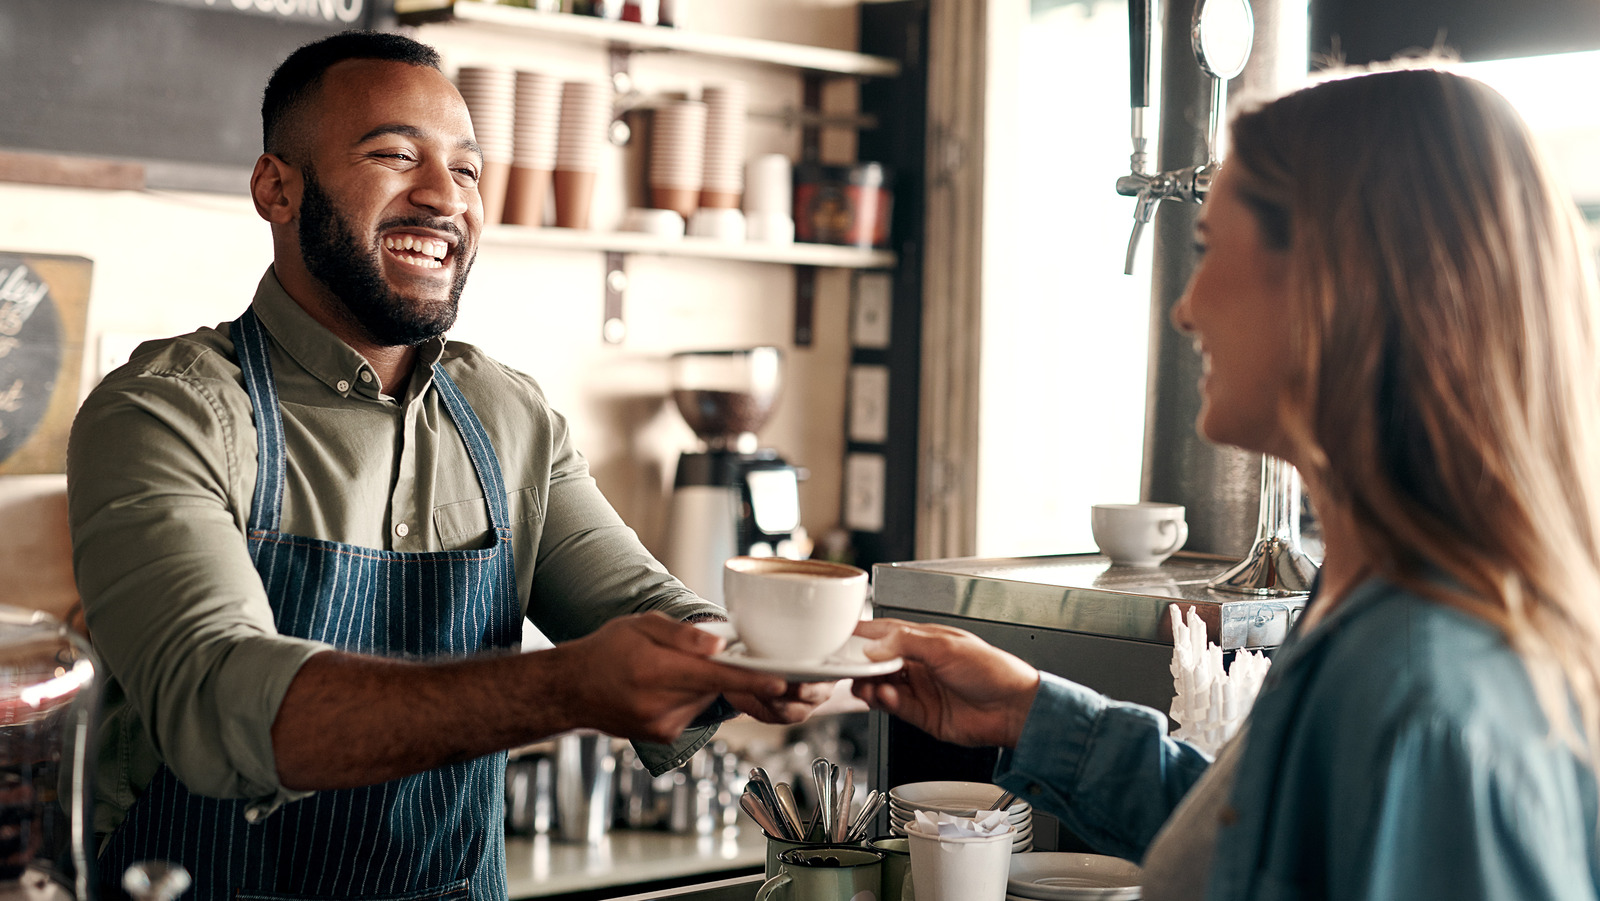 11 Drinks That Are A Red Flag For Baristas, According To A Coffee
Expert